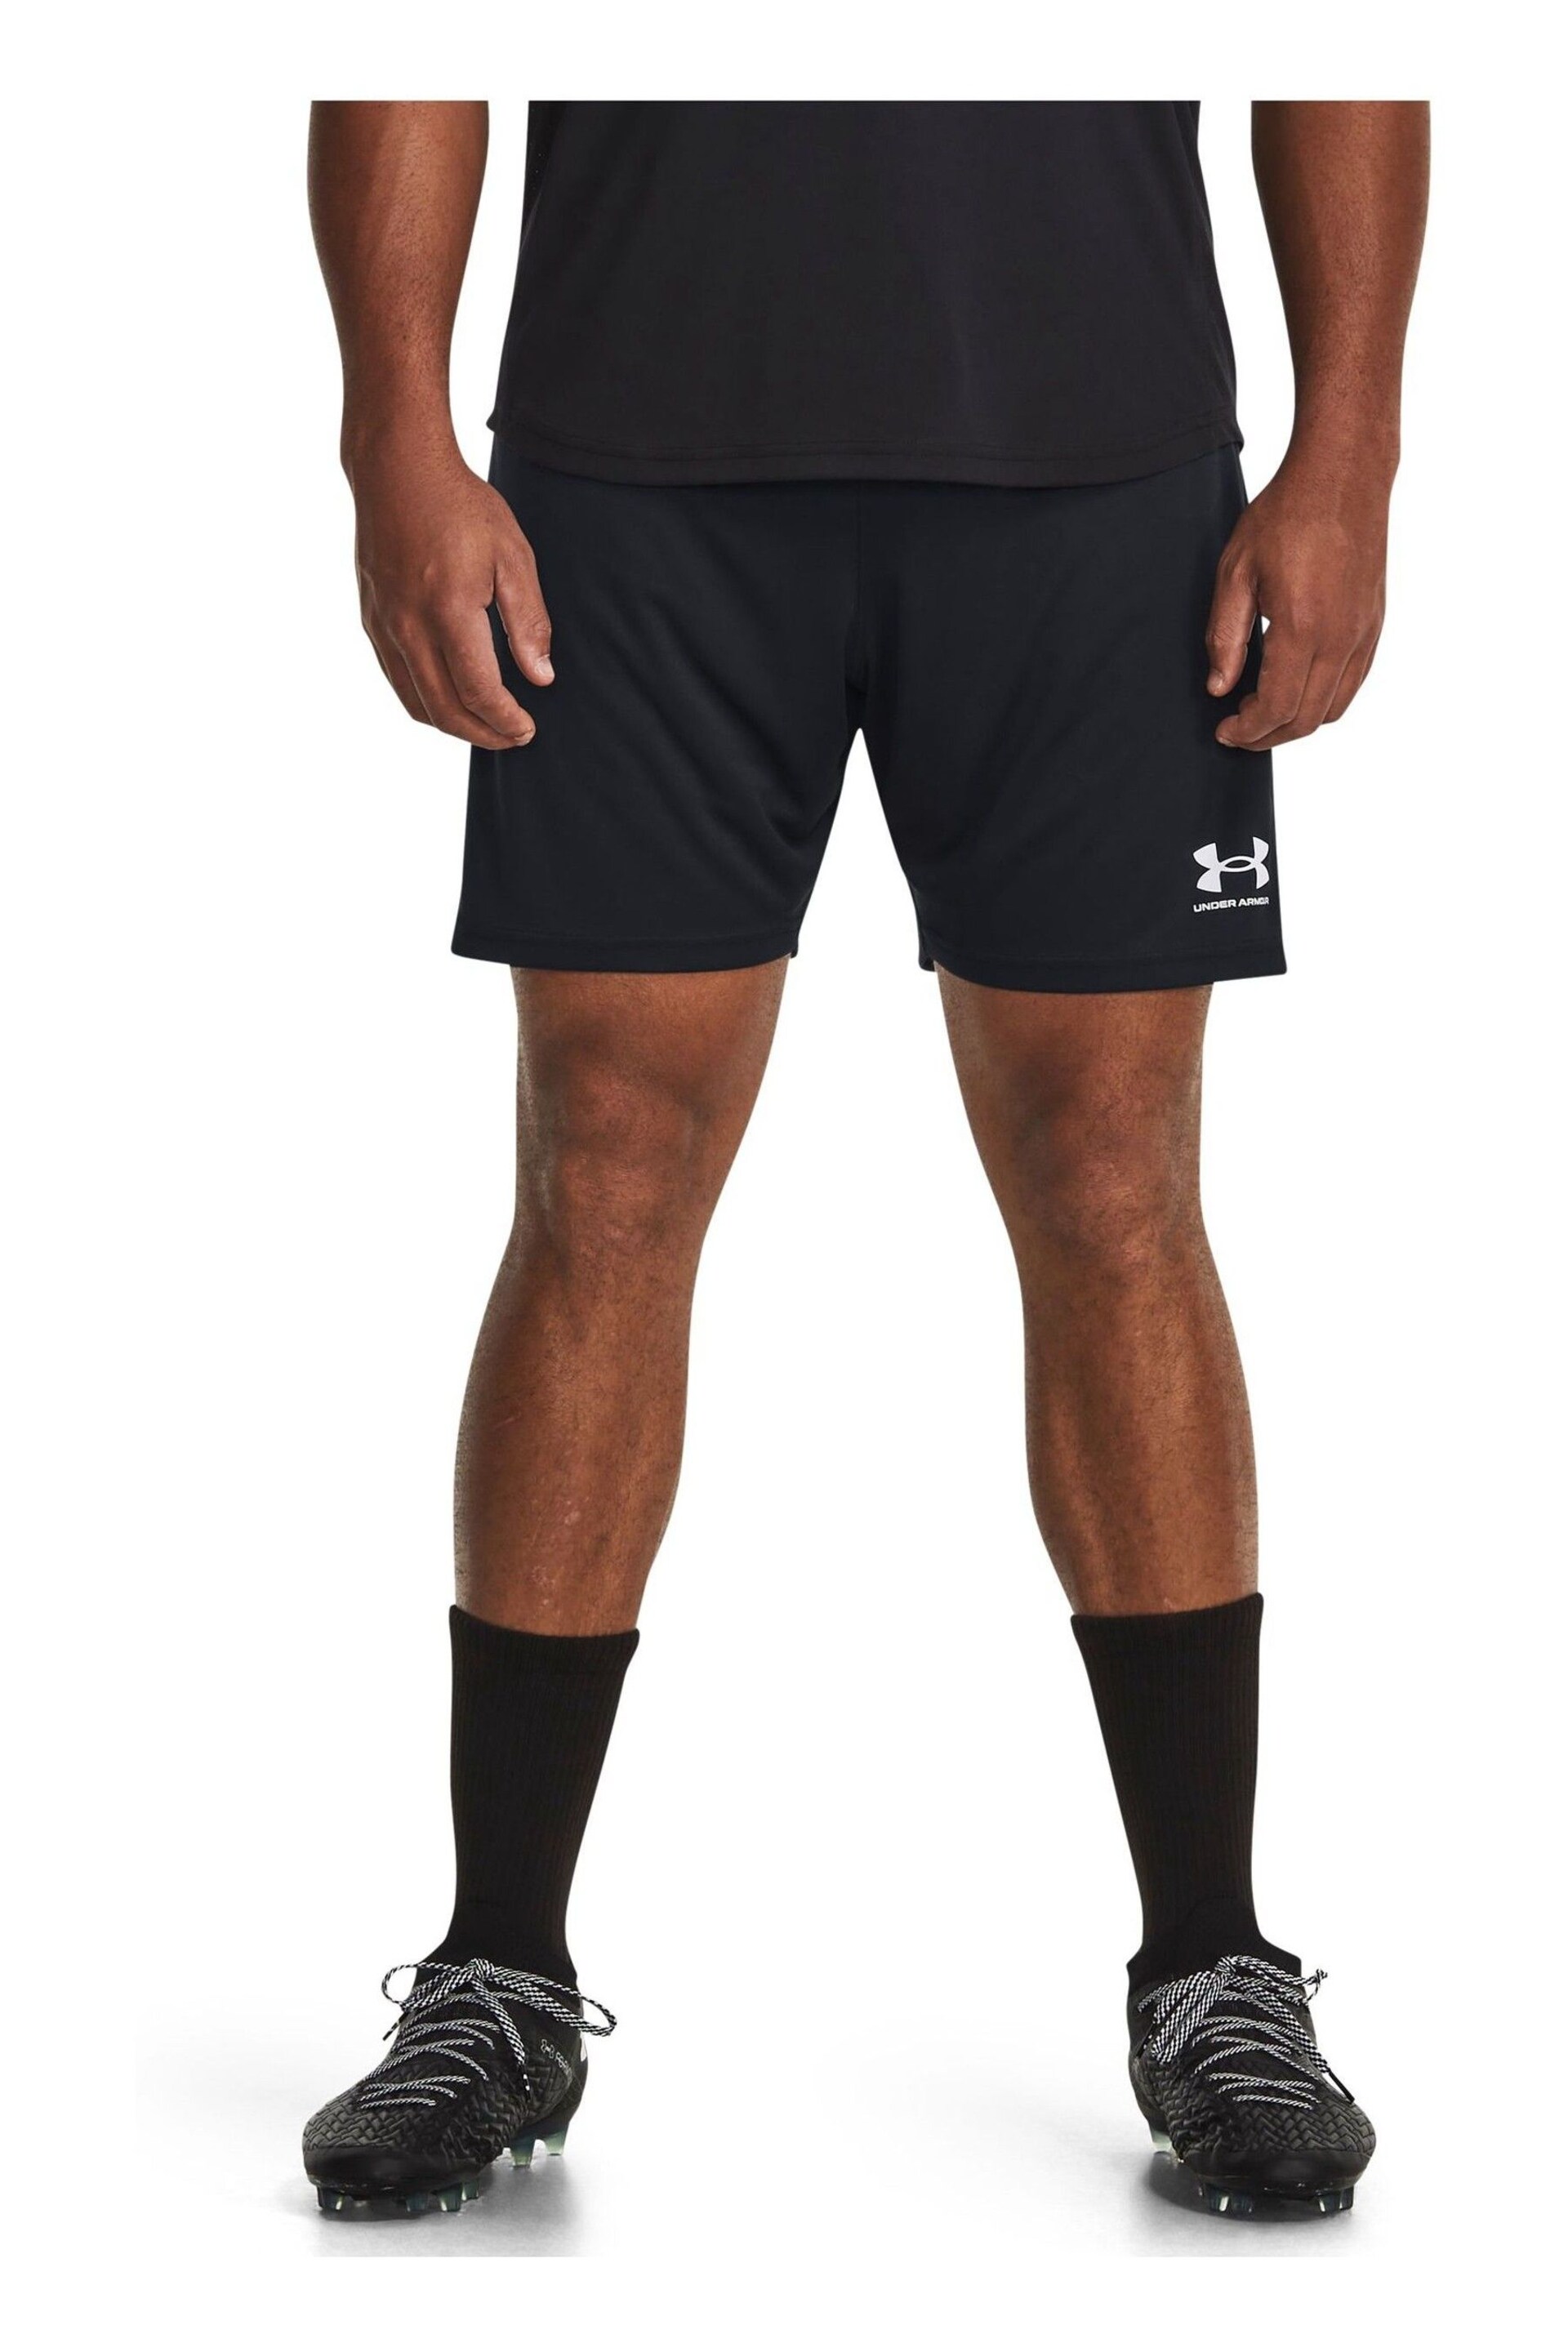 Under Armour Black/White Challenger Knit Shorts - Image 1 of 5